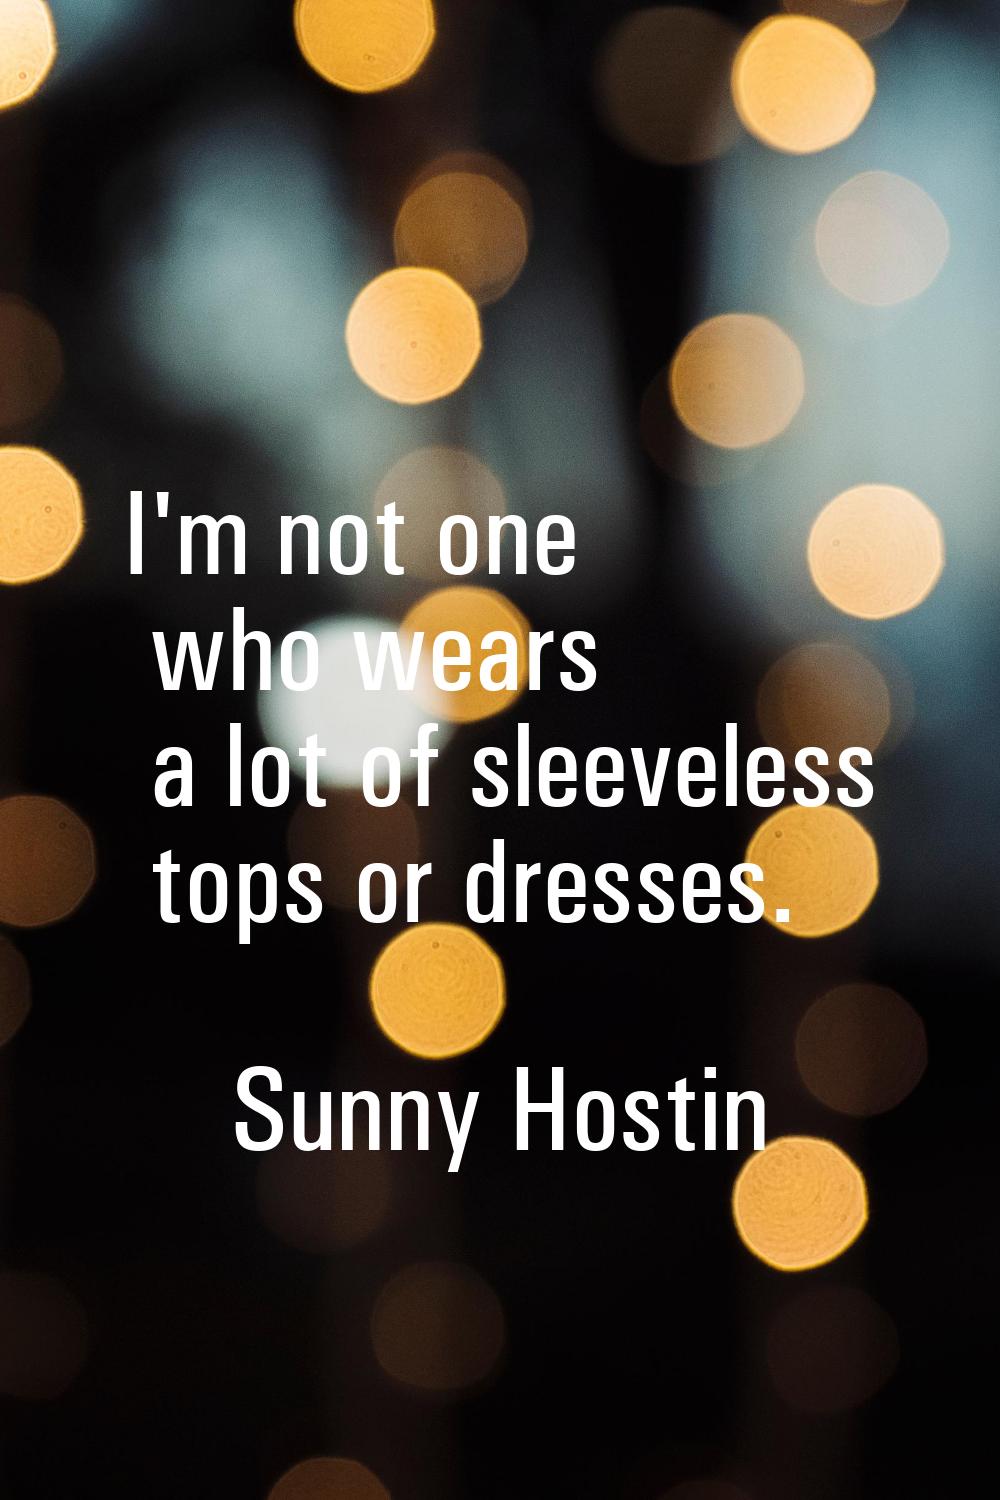 I'm not one who wears a lot of sleeveless tops or dresses.